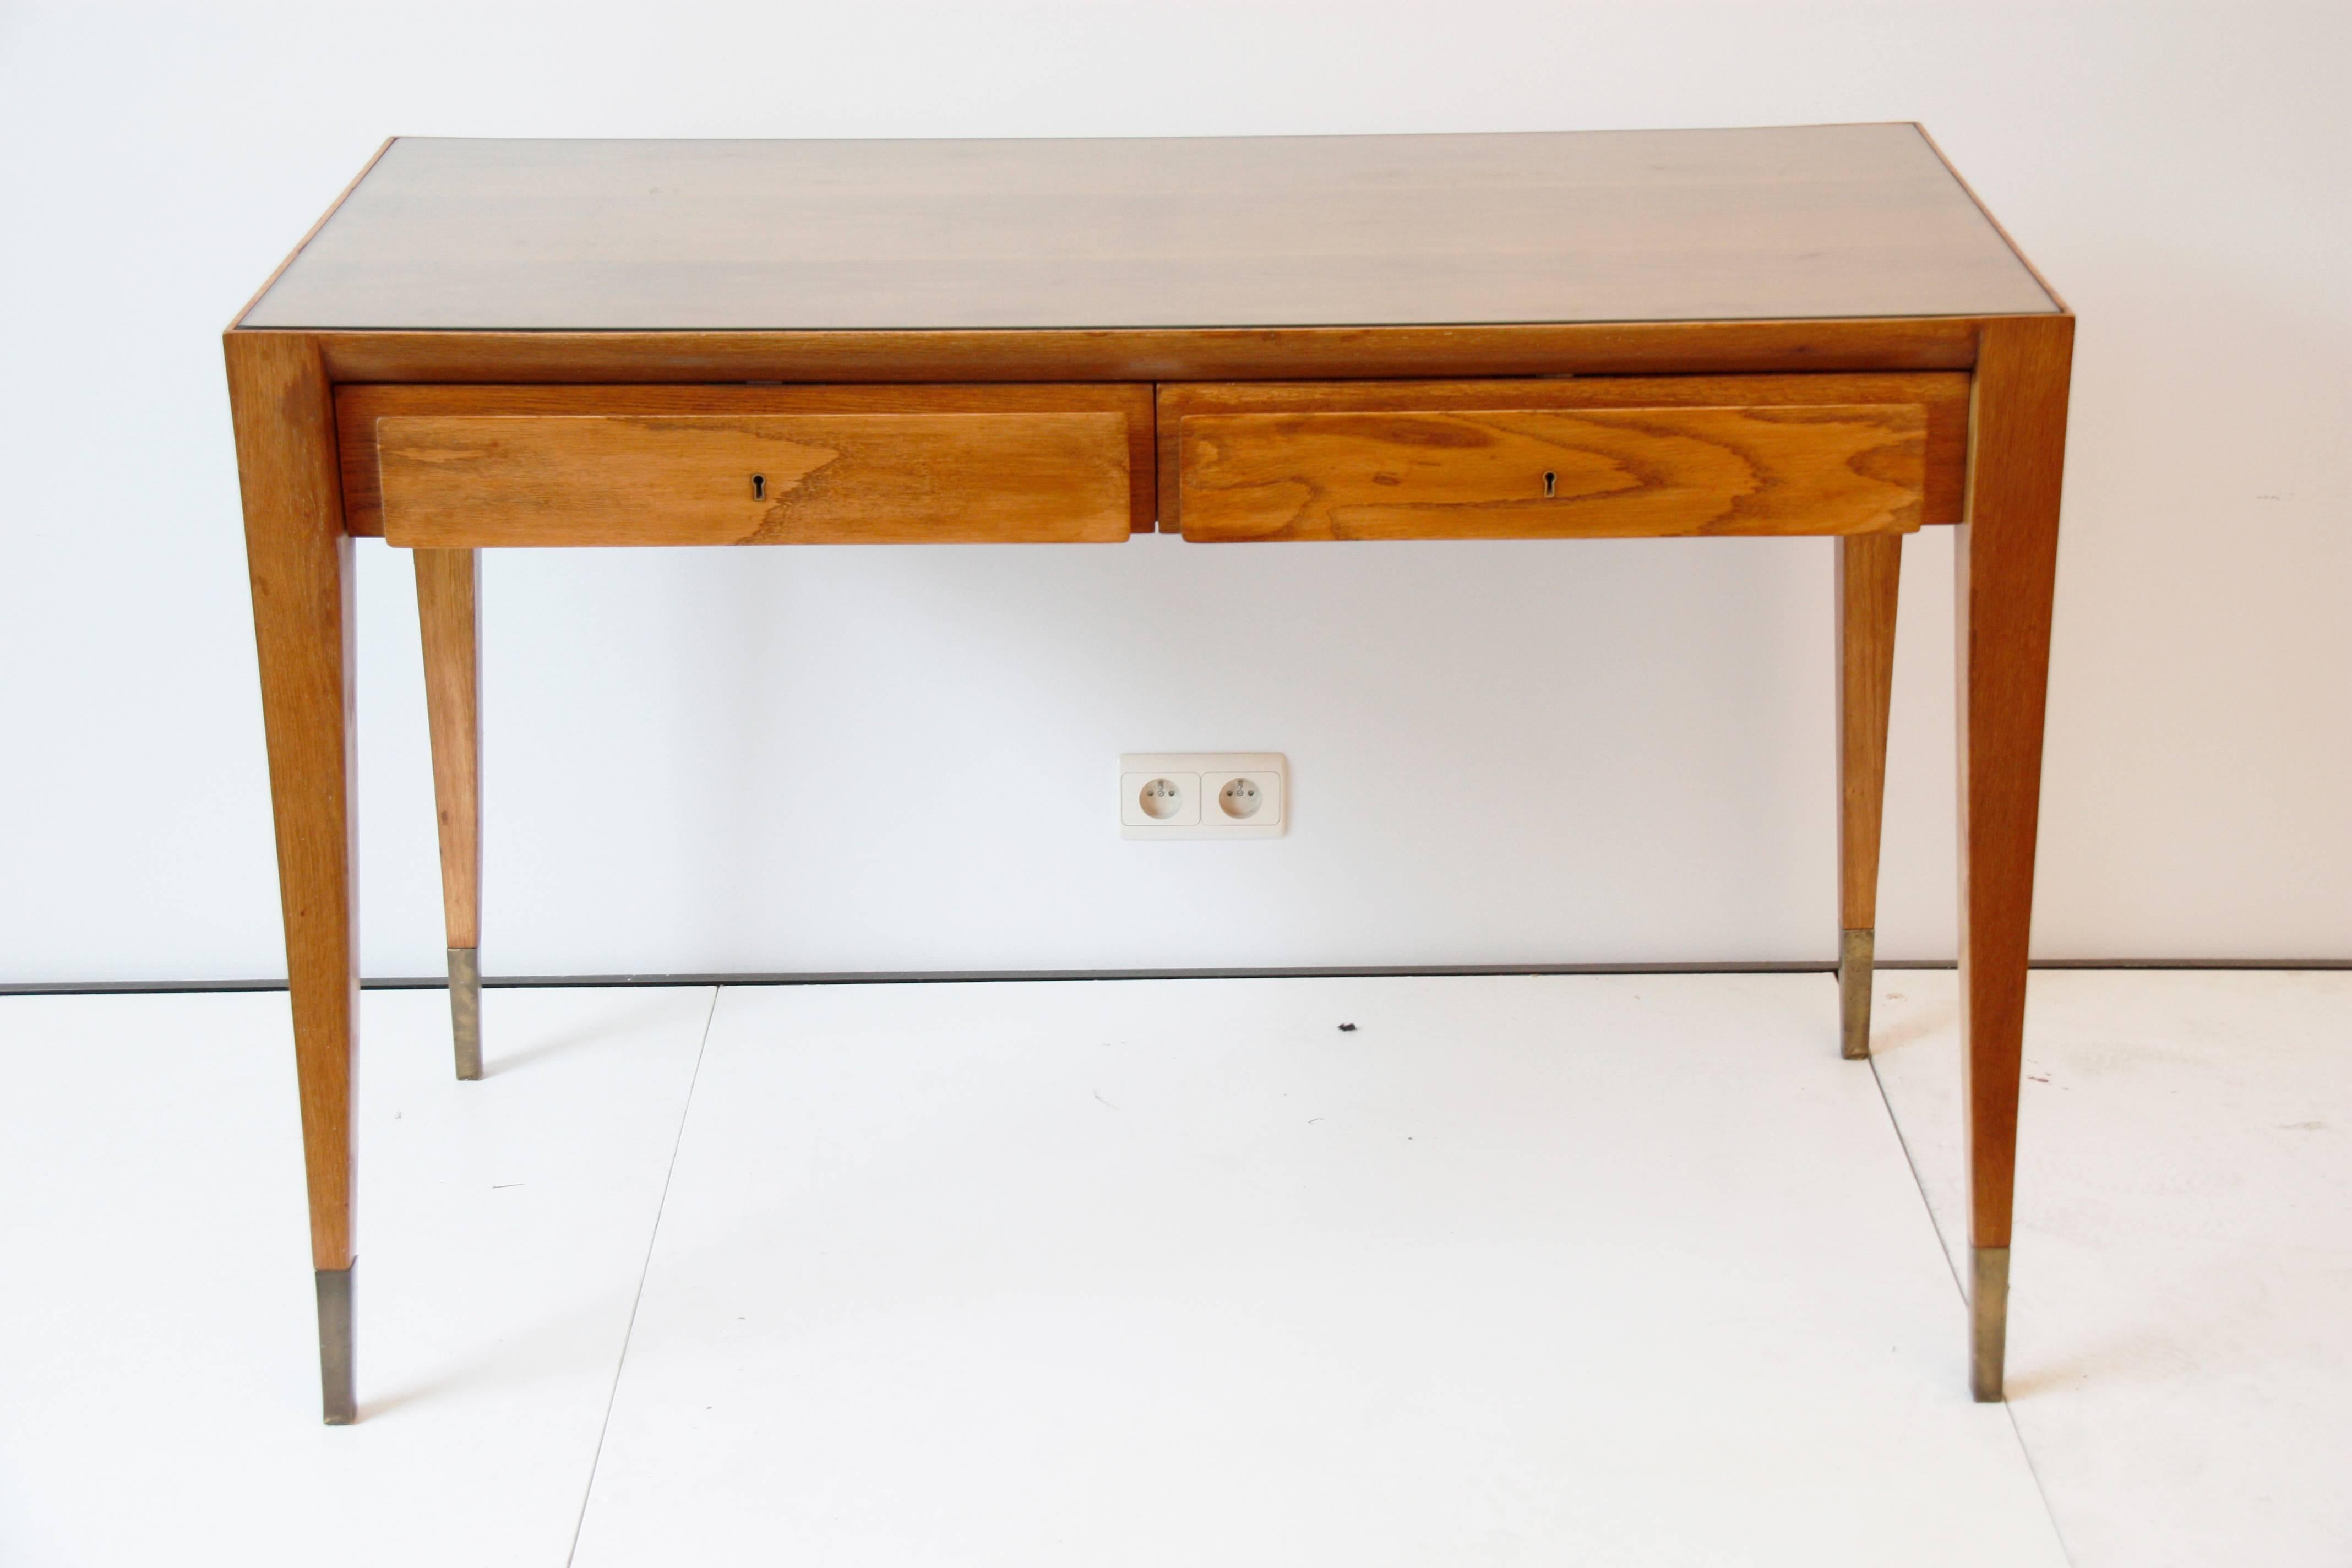 Vintage rectangular desk in clear oak with two drawers, on the top a thin glass, brass feet design by Gio Ponti, Italy, circa 1950. Measures: 47.24in x 23.62in - 31.5in height
1m20 x 60cm - hauteur 80cm.